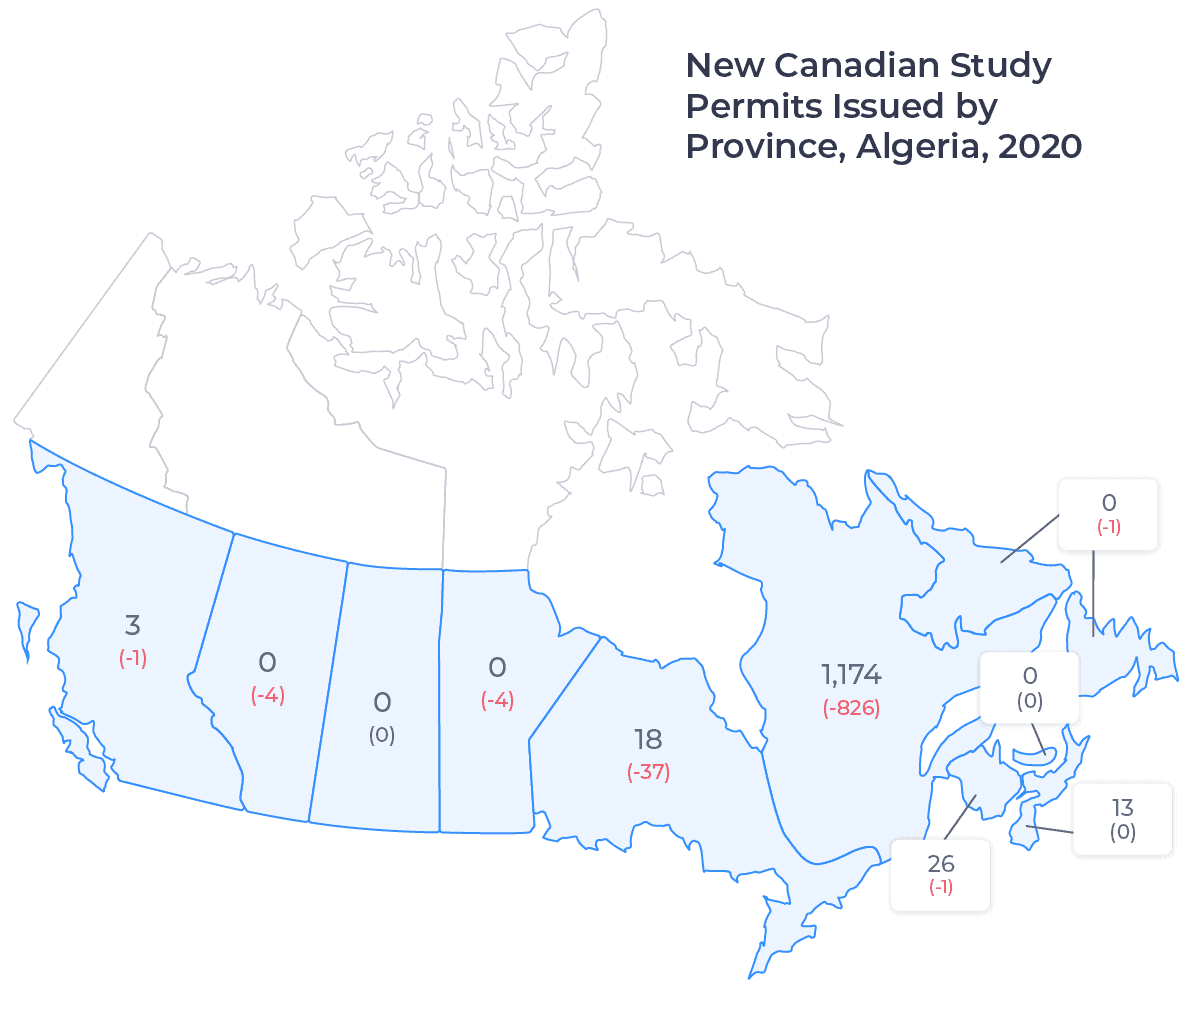 New Canadian Study Permits Issued by Province, Algeria, 2020